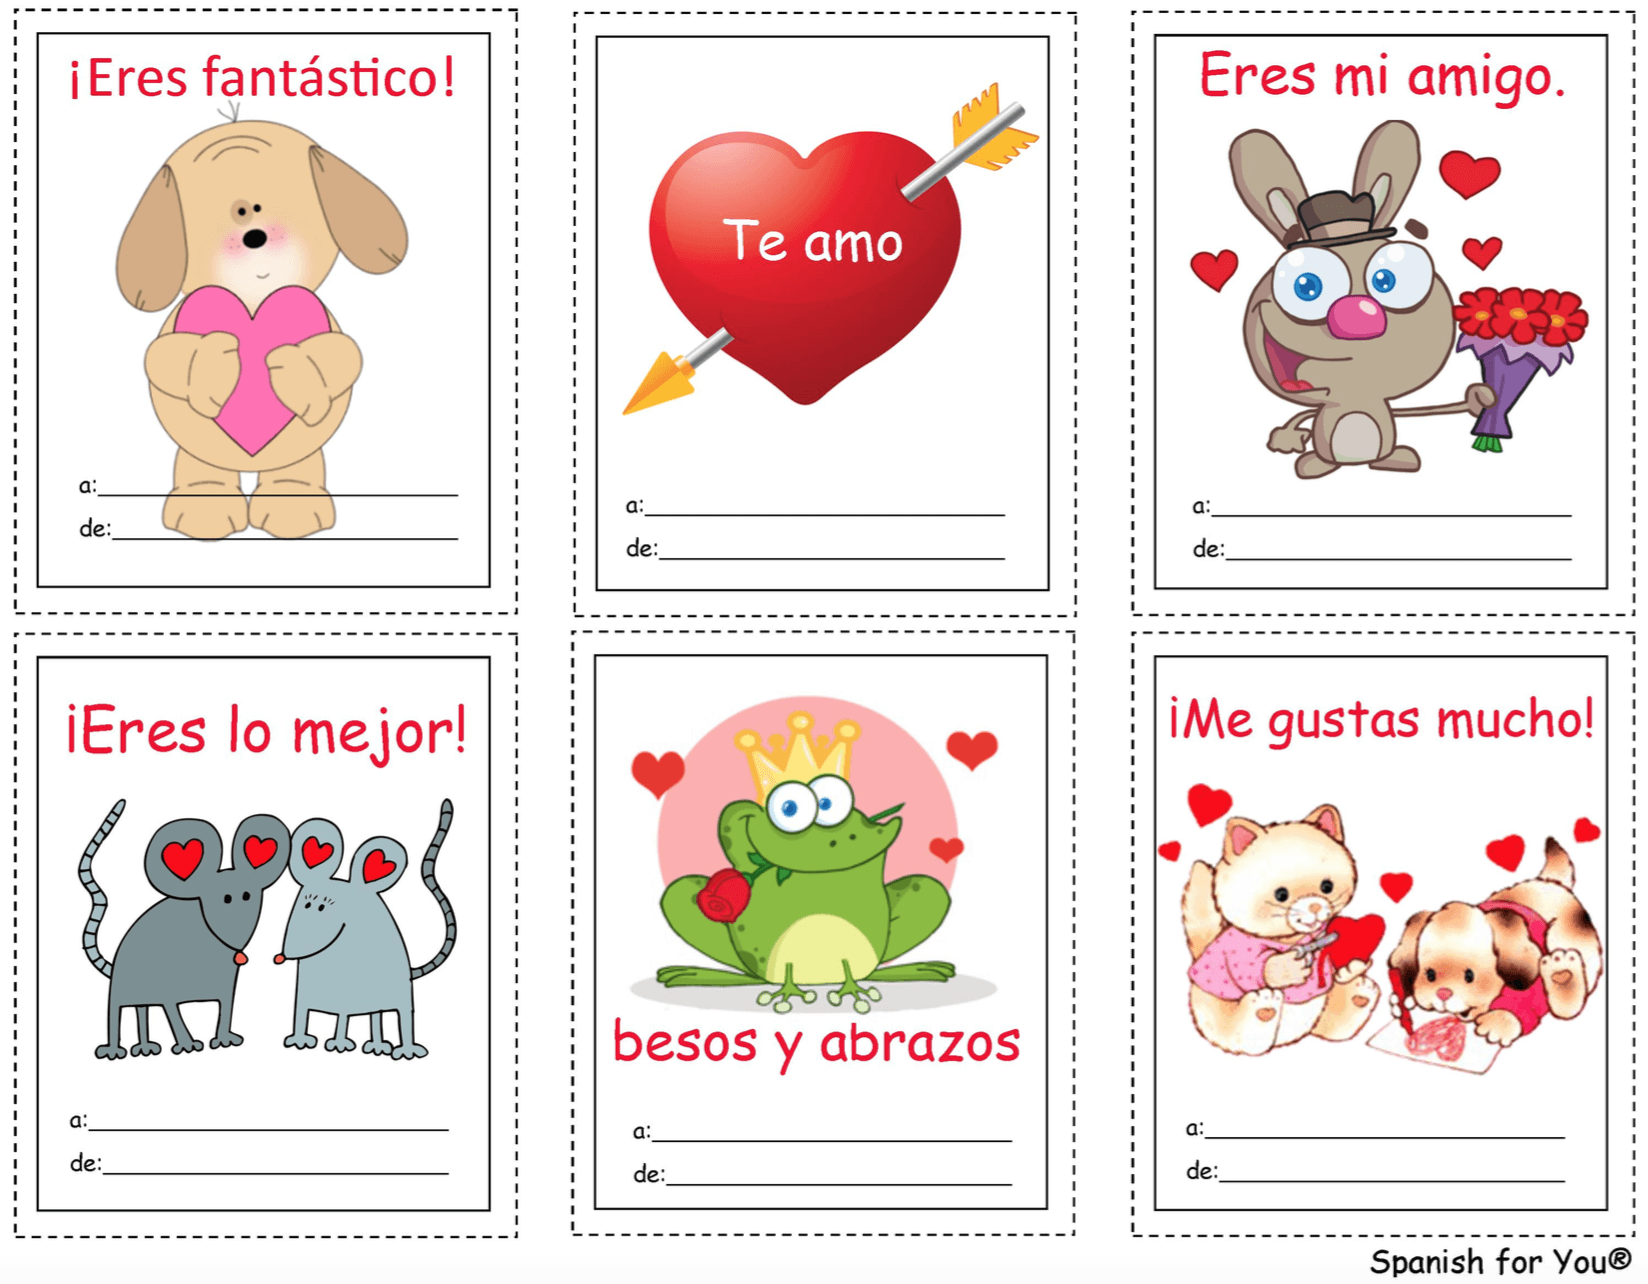 Fun valentines in Spanish to pass out to classmates. - MommyMaleta